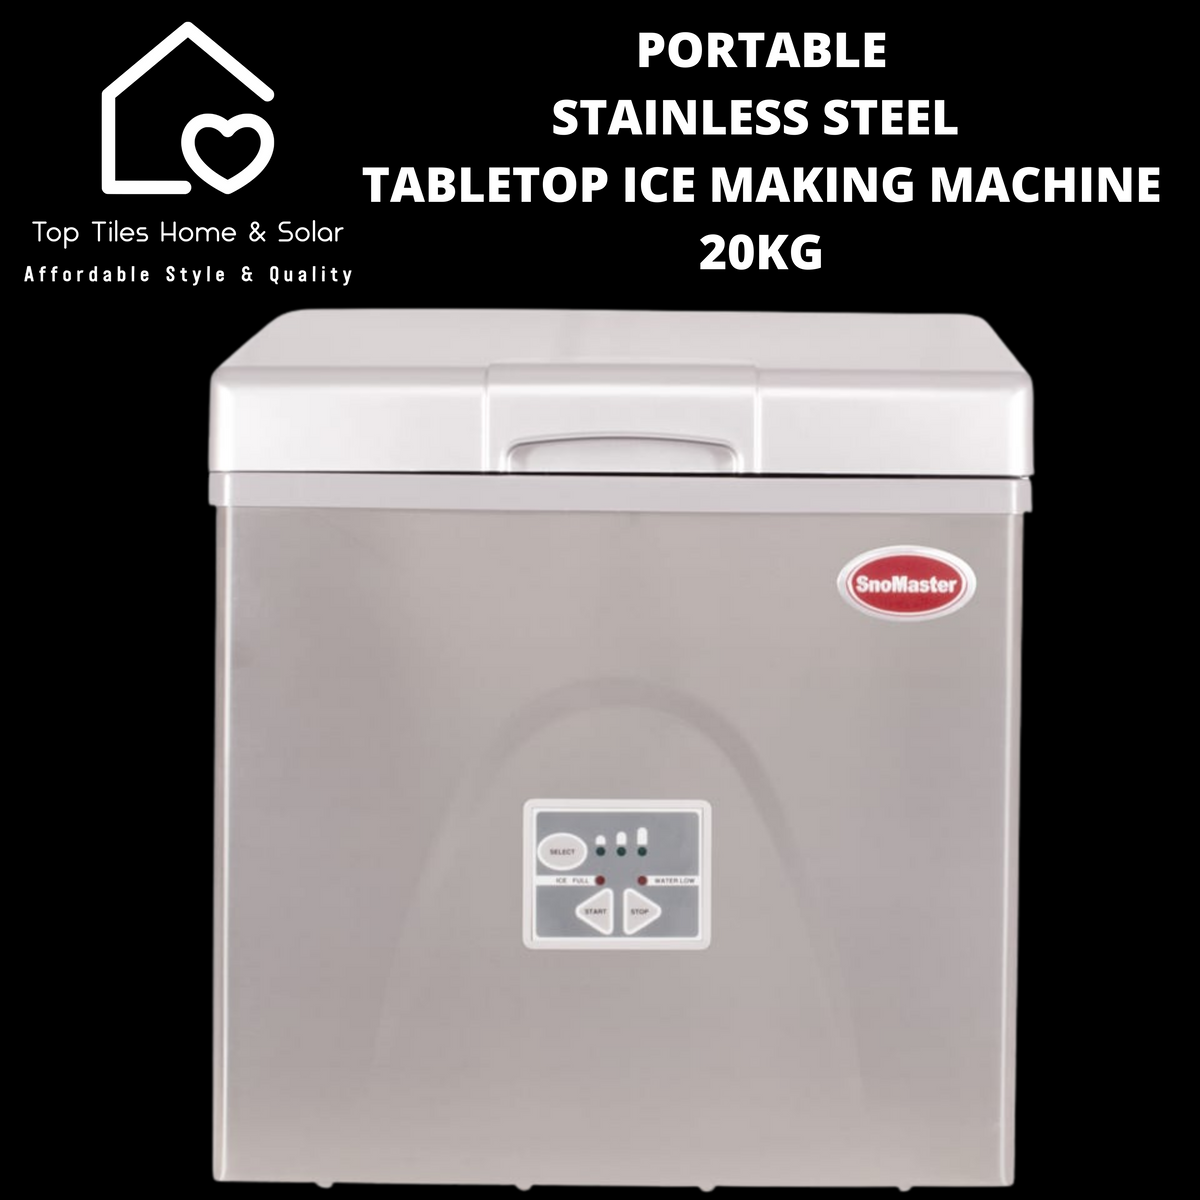 Portable Stainless Steel Tabletop Ice Making Machine - 20kg – Top Tiles  Home & Solar